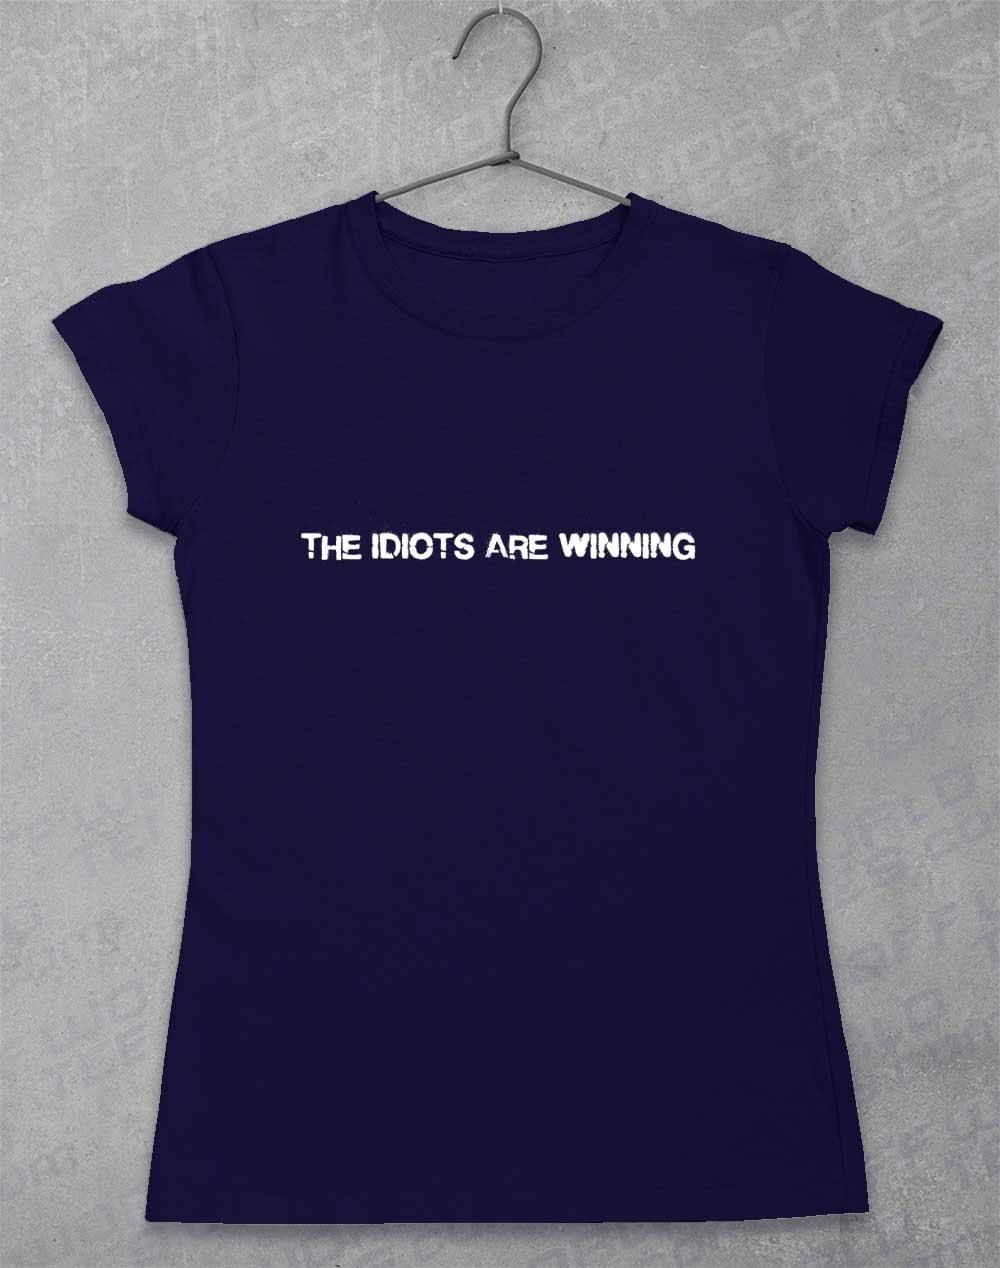 The Idiots Are Winning Womens T-Shirt 8-10 / Navy  - Off World Tees